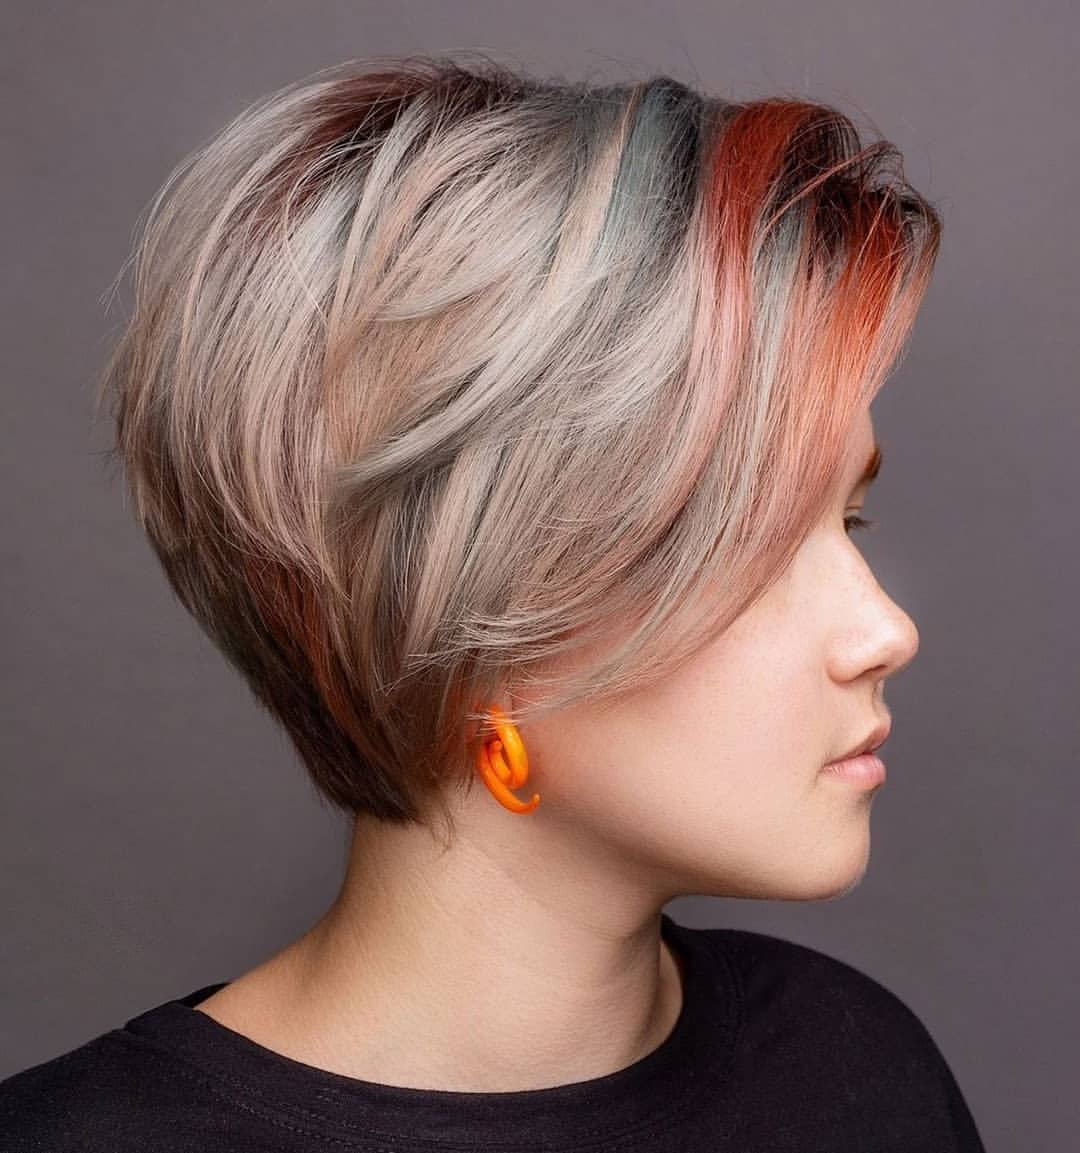 100 Most Edgy Short Hairstyles For Women 2021 How To Do Easy 